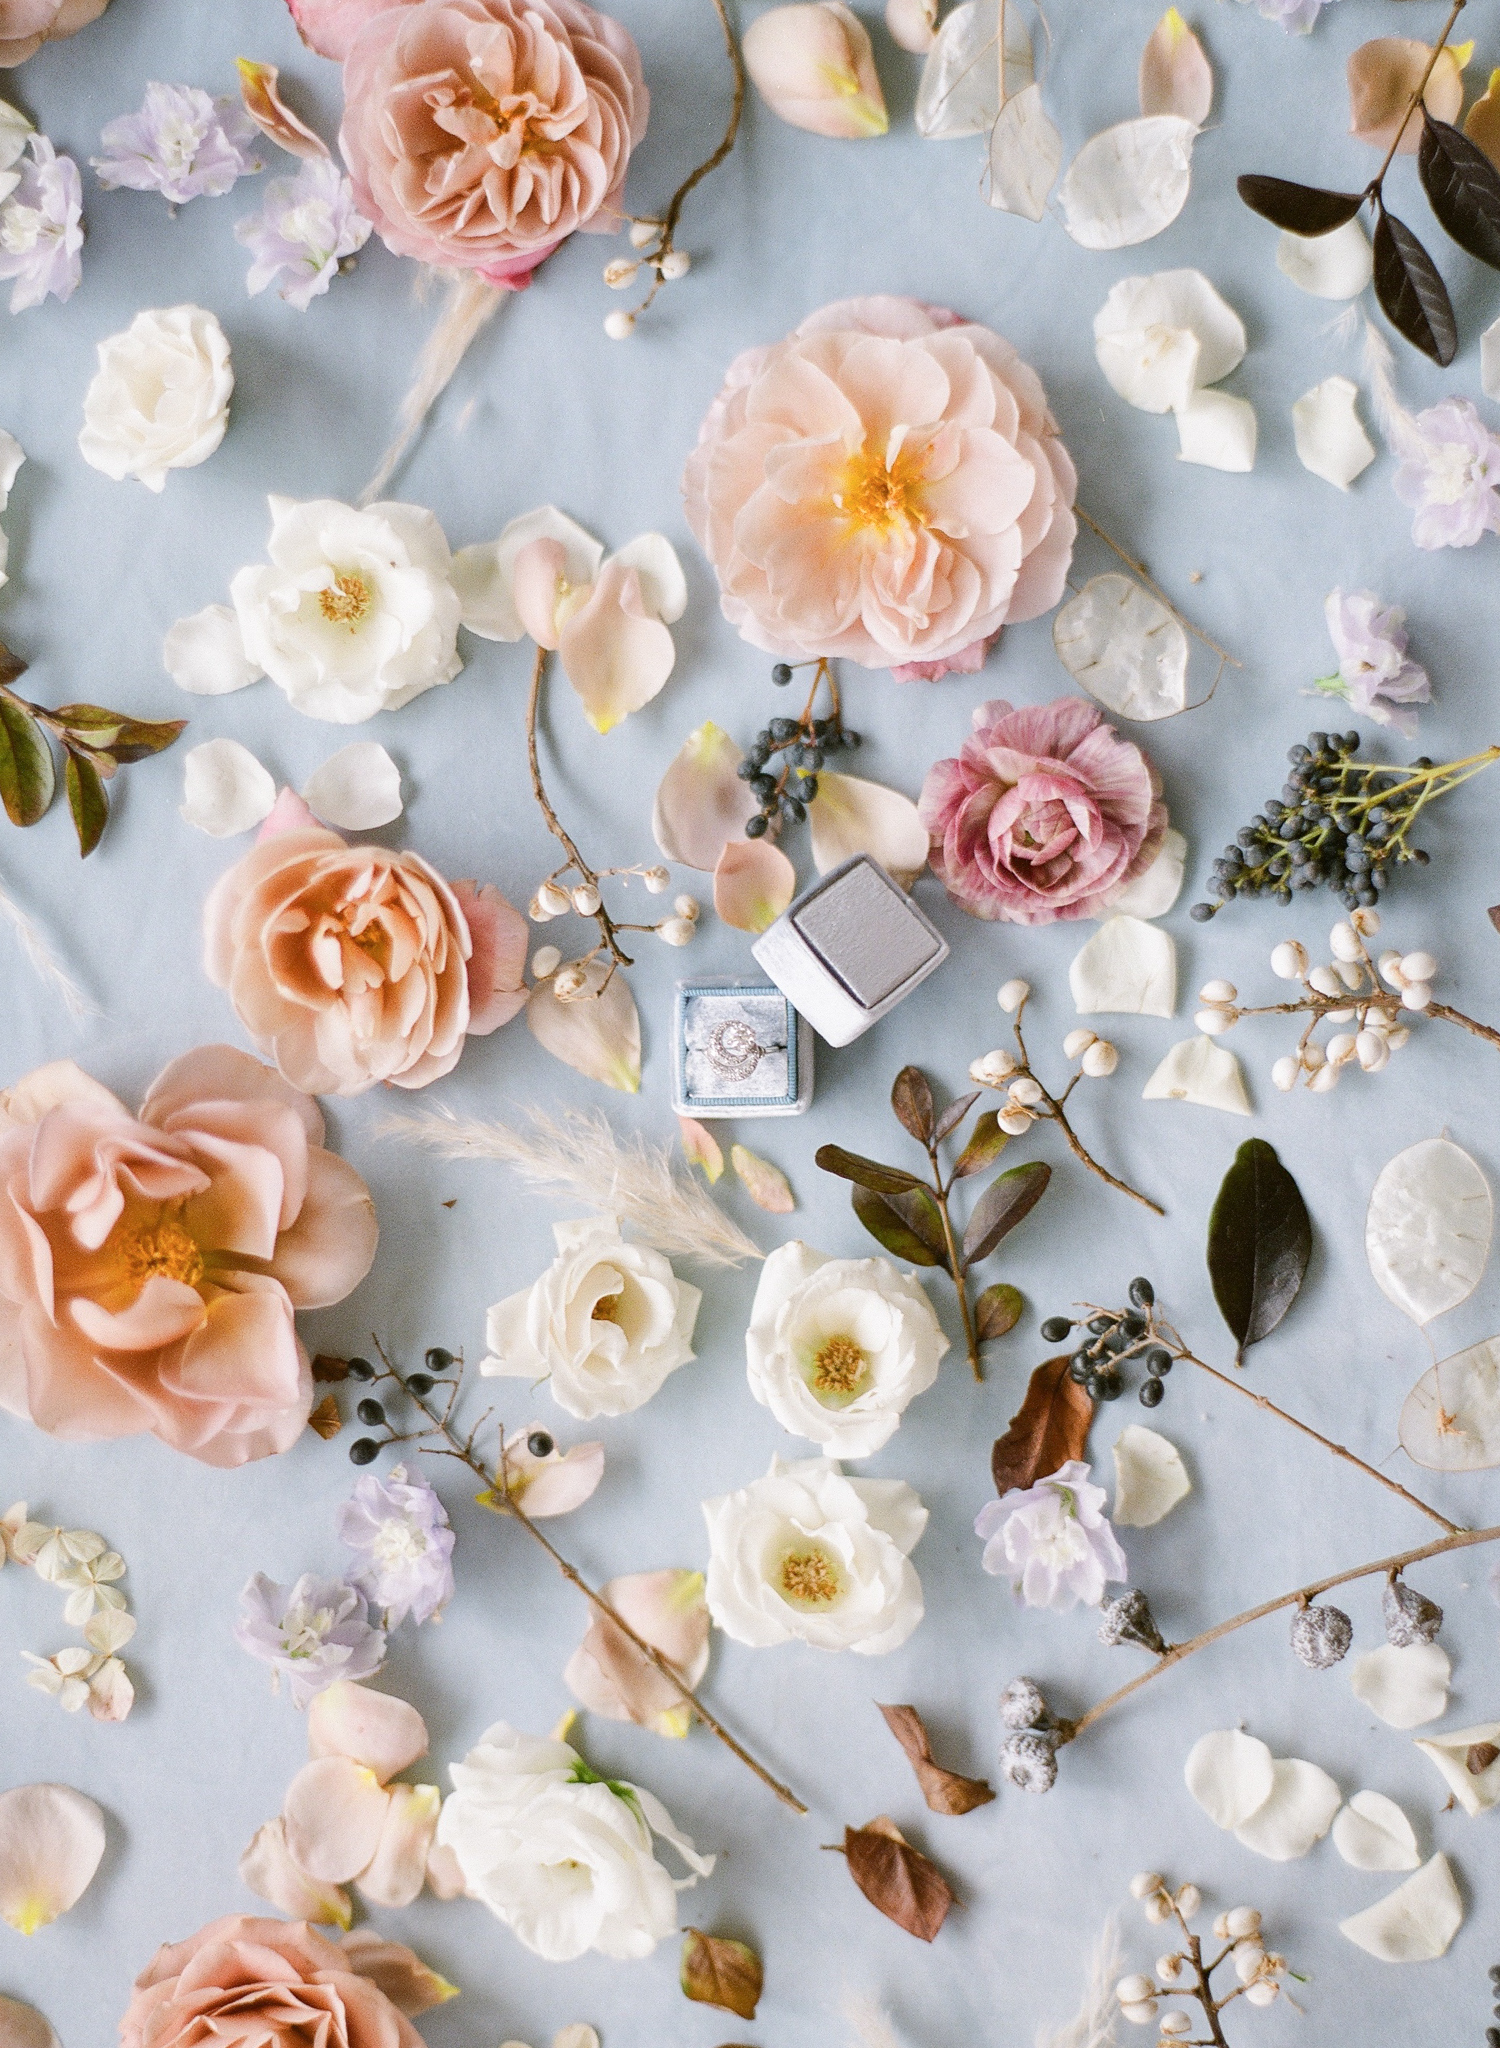 Fine Art Wedding Photographer Paris | Molly Carr Photography | Isibeal Studio | Tara Nicole Weddings | Antique Engagement Ring Surrounded by Flowers